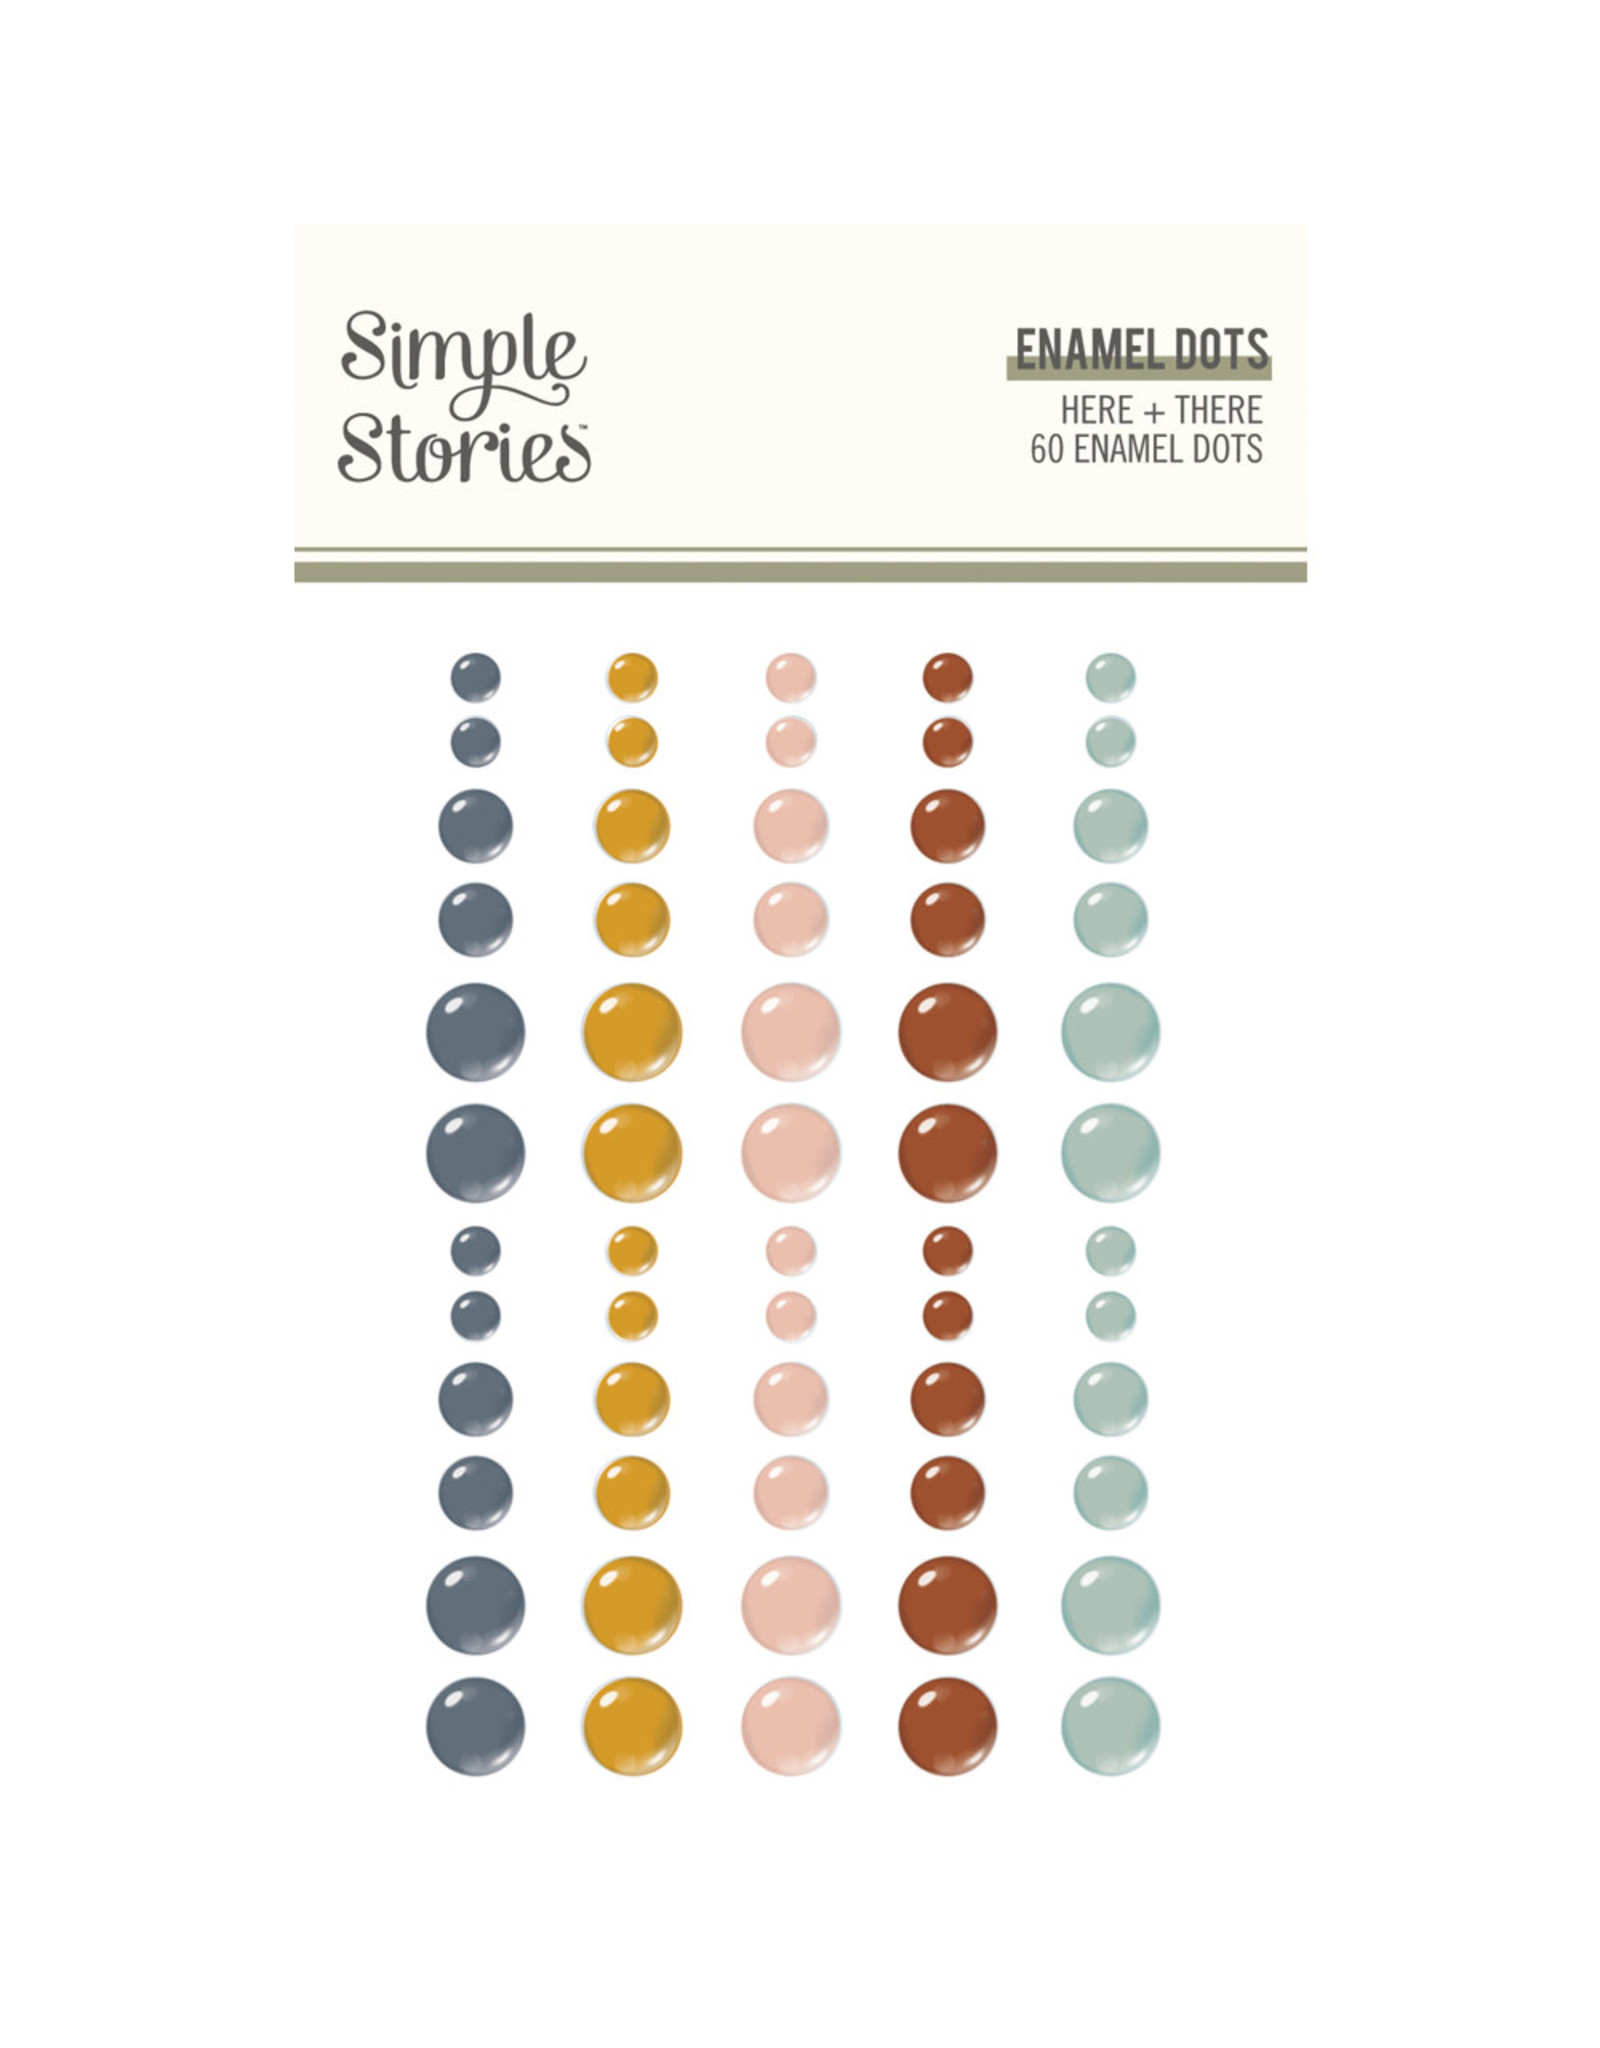 Simple Stories Here + There - Enamel Dots